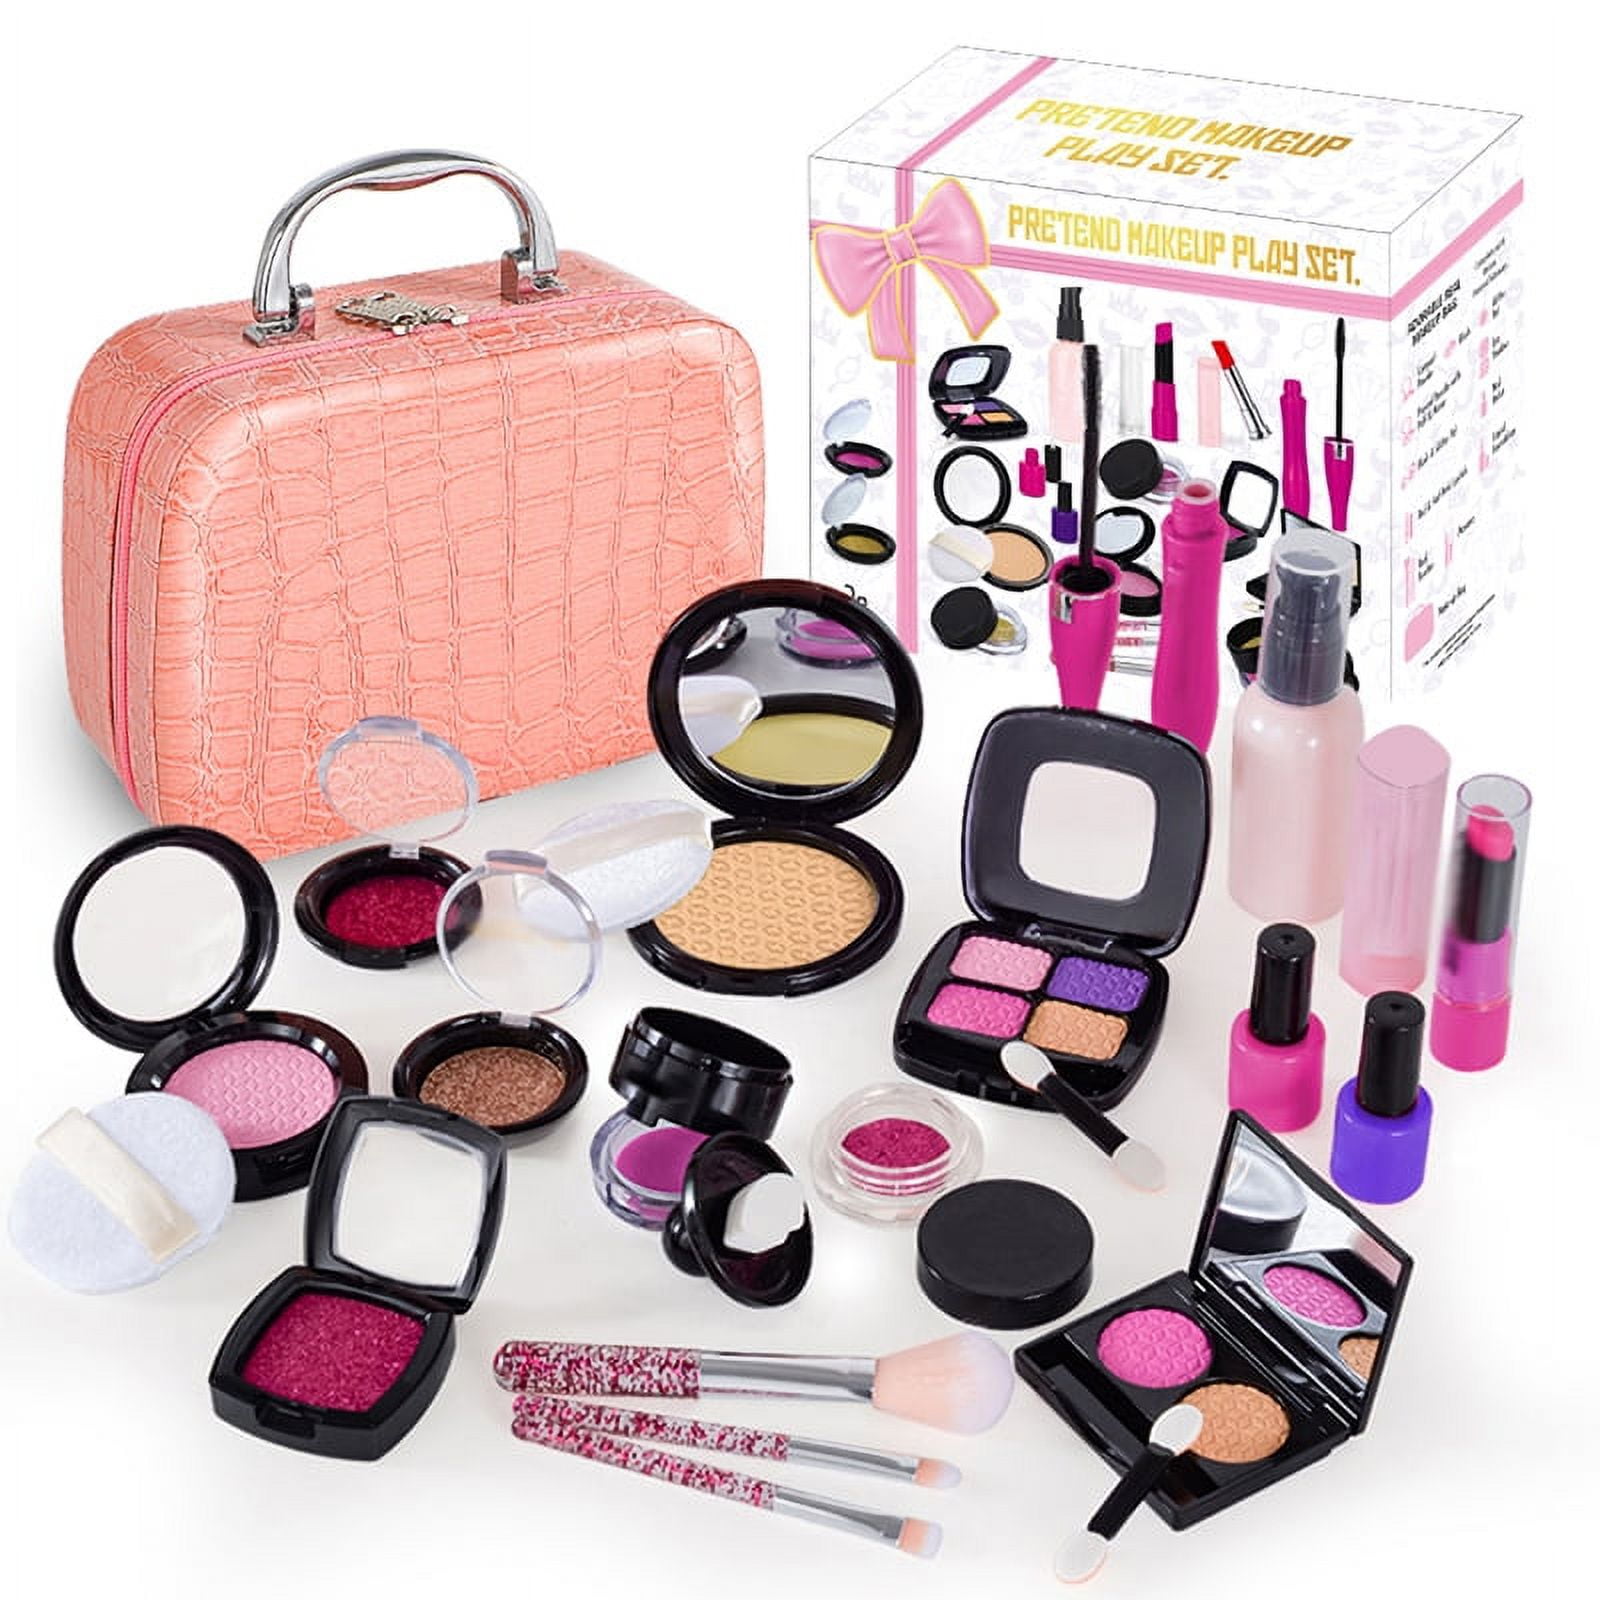 Sendida Kids Makeup Kit for Girl Gifts, 54pcs in 1 Makeup Toys Washable Little Girls Princess Make Up Toys for 4 5 6 7 8 9 Year Old Girl Birthday Gift